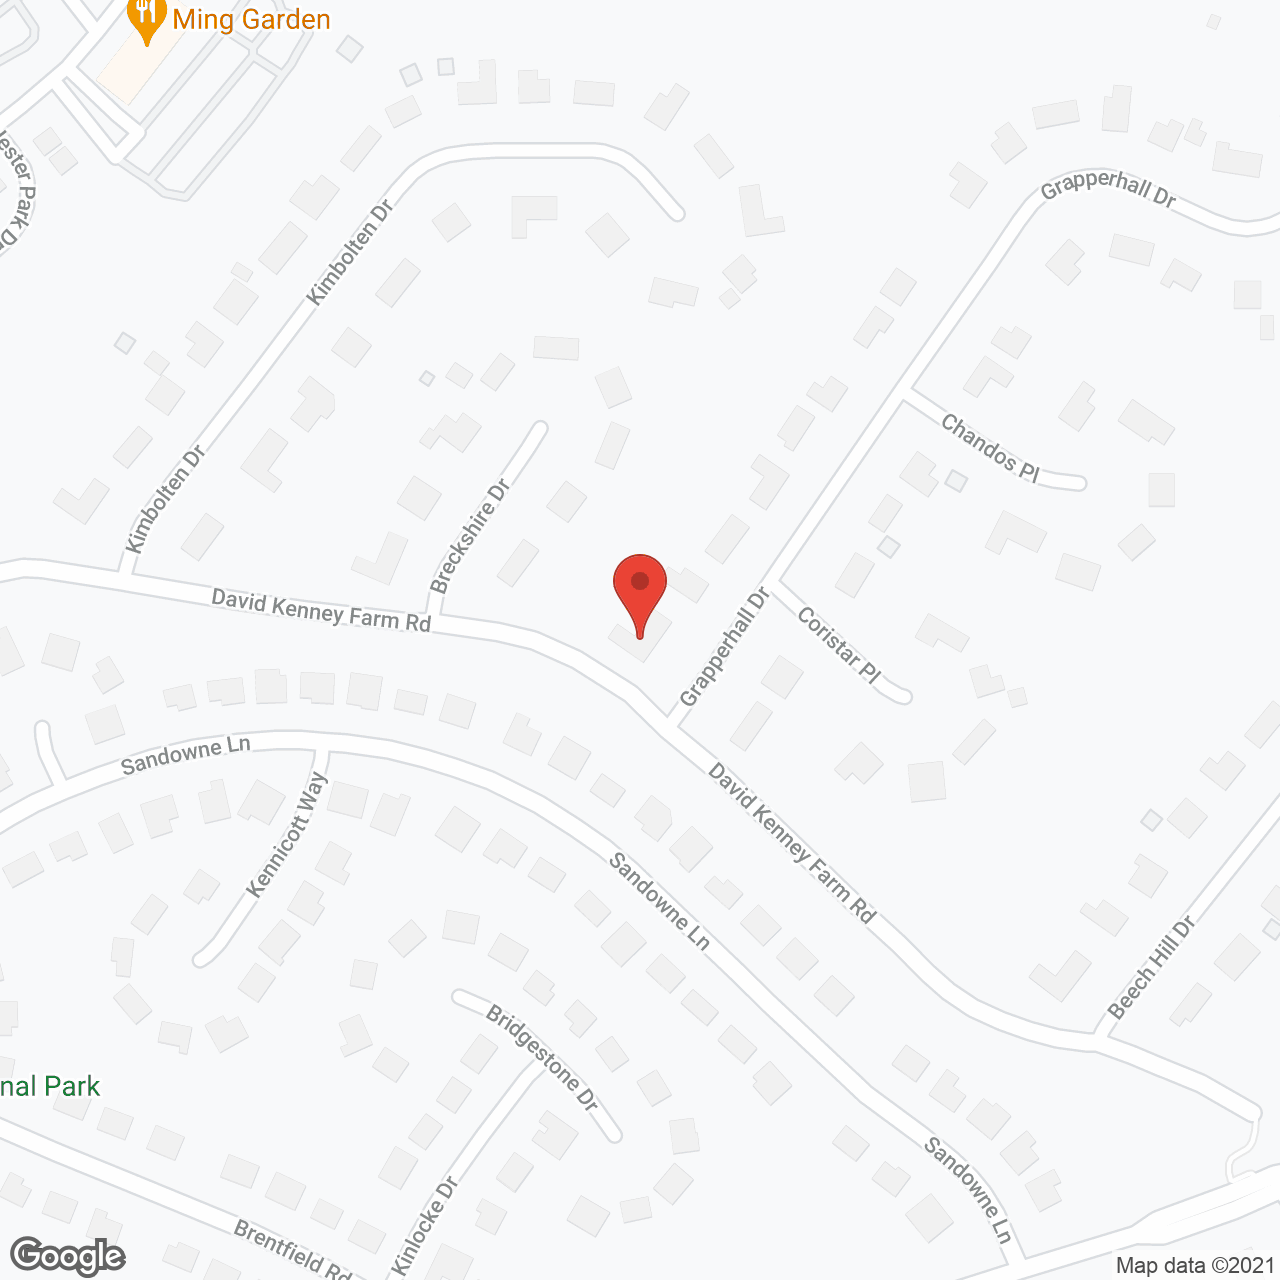 Grapperhall Family Care Home in google map